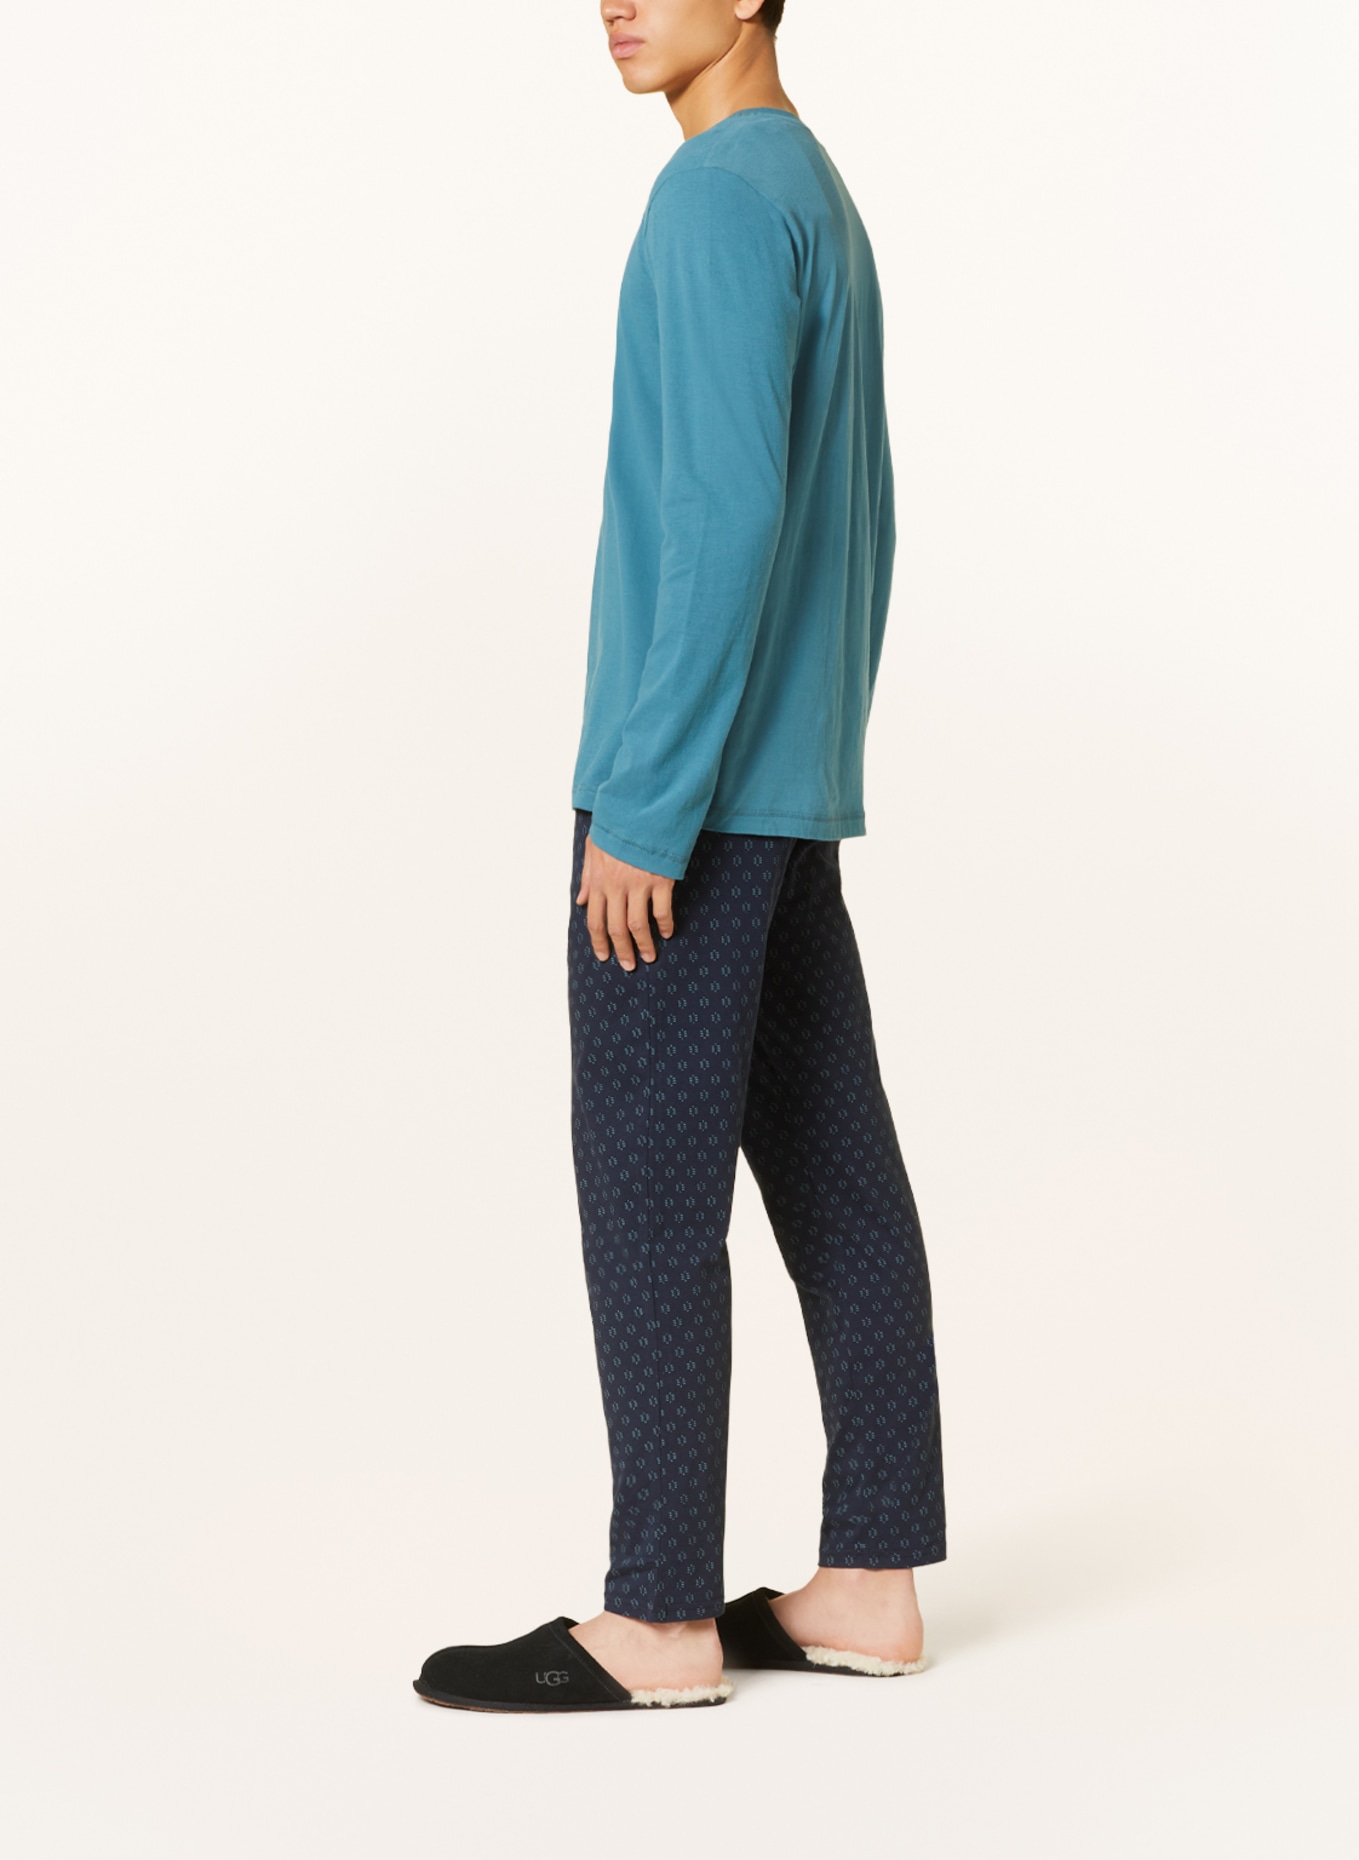 SCHIESSER Pajama pants MIX+RELAX, Color: DARK BLUE/ TEAL (Image 4)